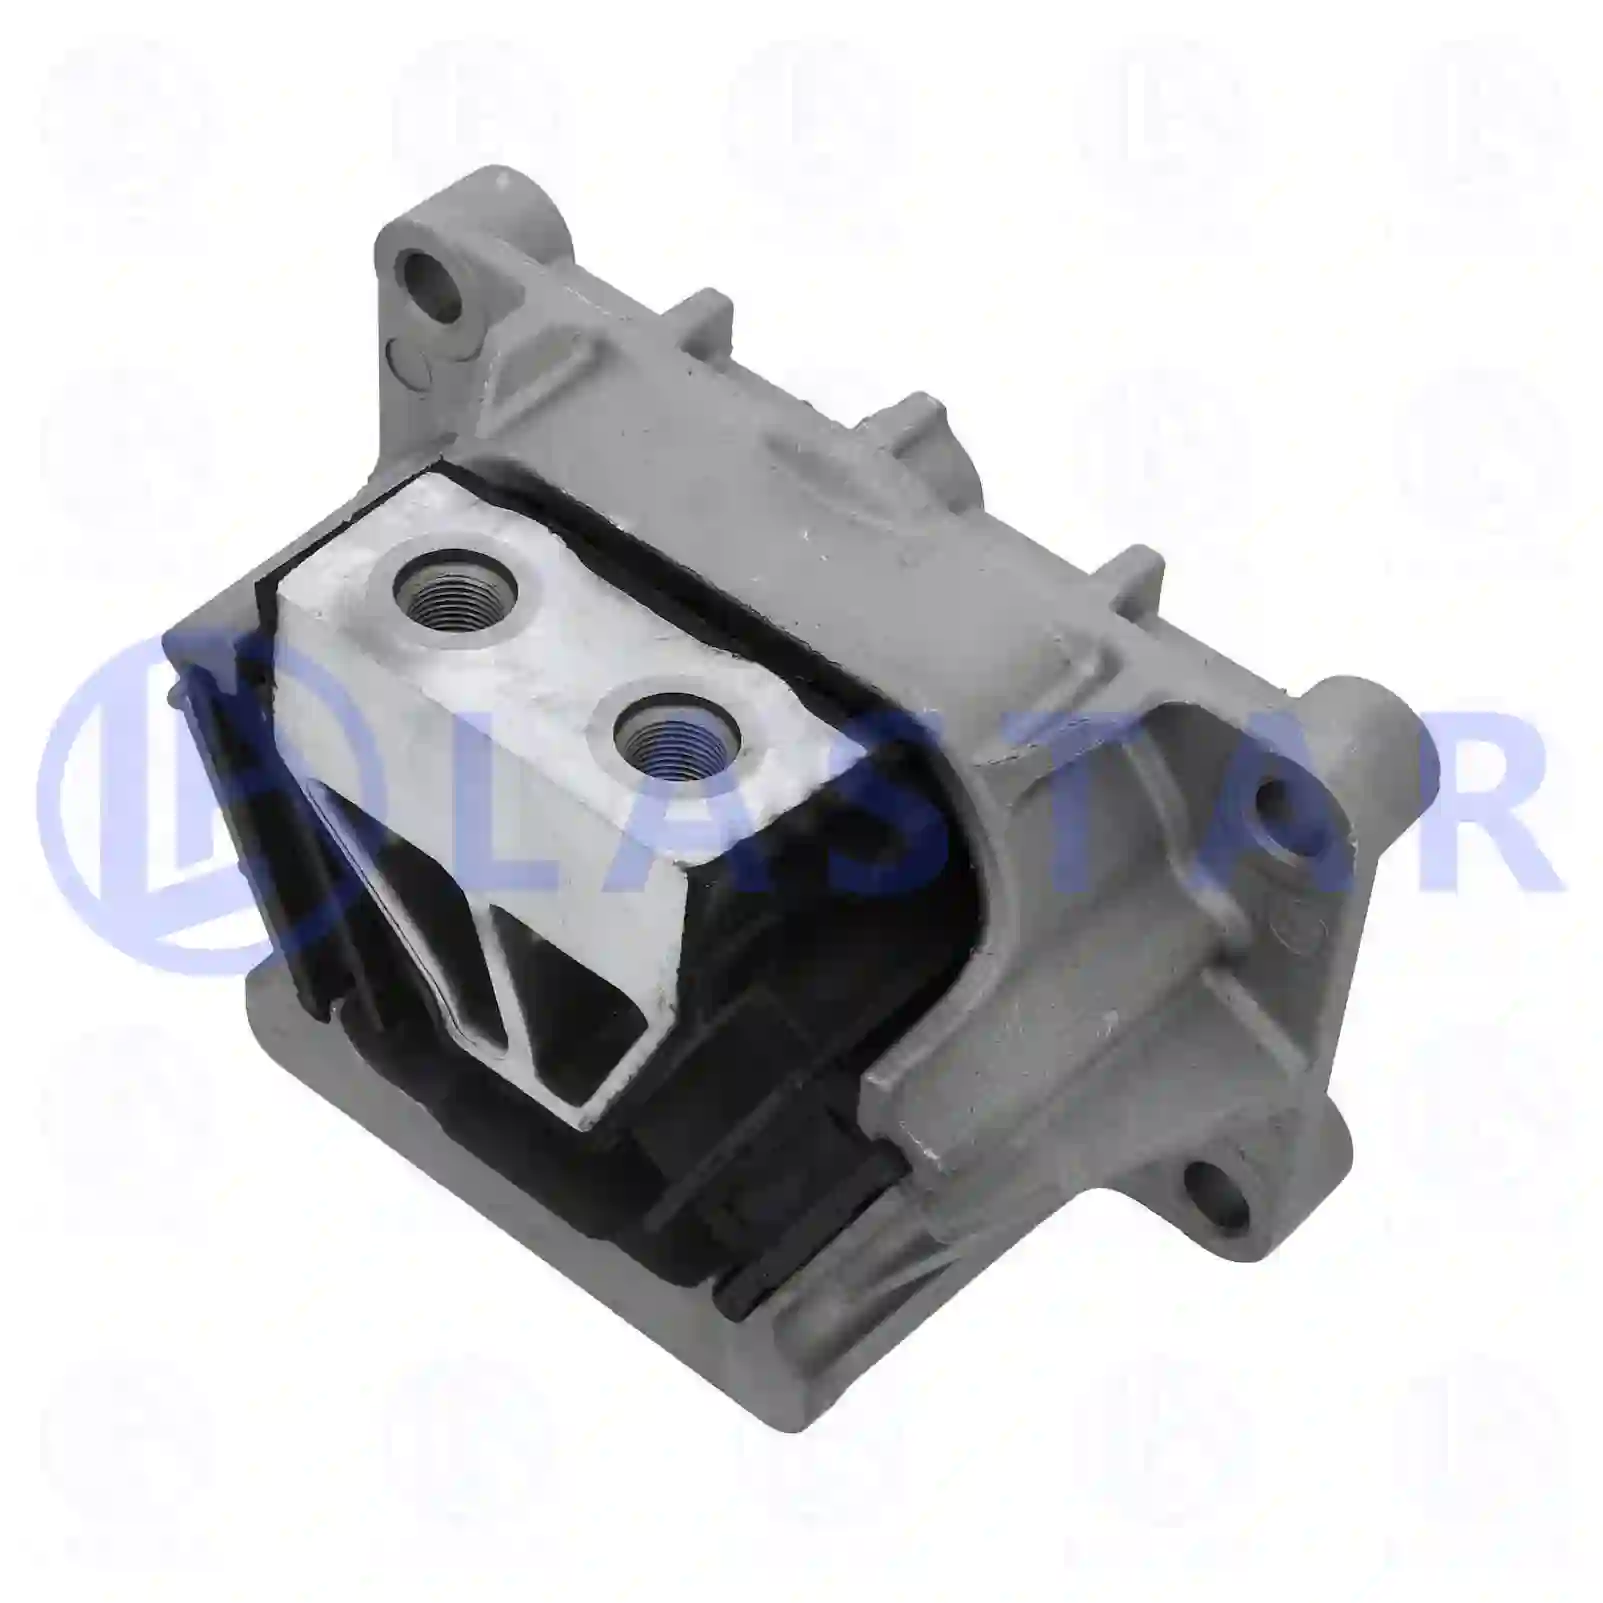 Engine mounting, 77702401, 6962410013, 9412414913, 9412415913, 9412417913, , ||  77702401 Lastar Spare Part | Truck Spare Parts, Auotomotive Spare Parts Engine mounting, 77702401, 6962410013, 9412414913, 9412415913, 9412417913, , ||  77702401 Lastar Spare Part | Truck Spare Parts, Auotomotive Spare Parts